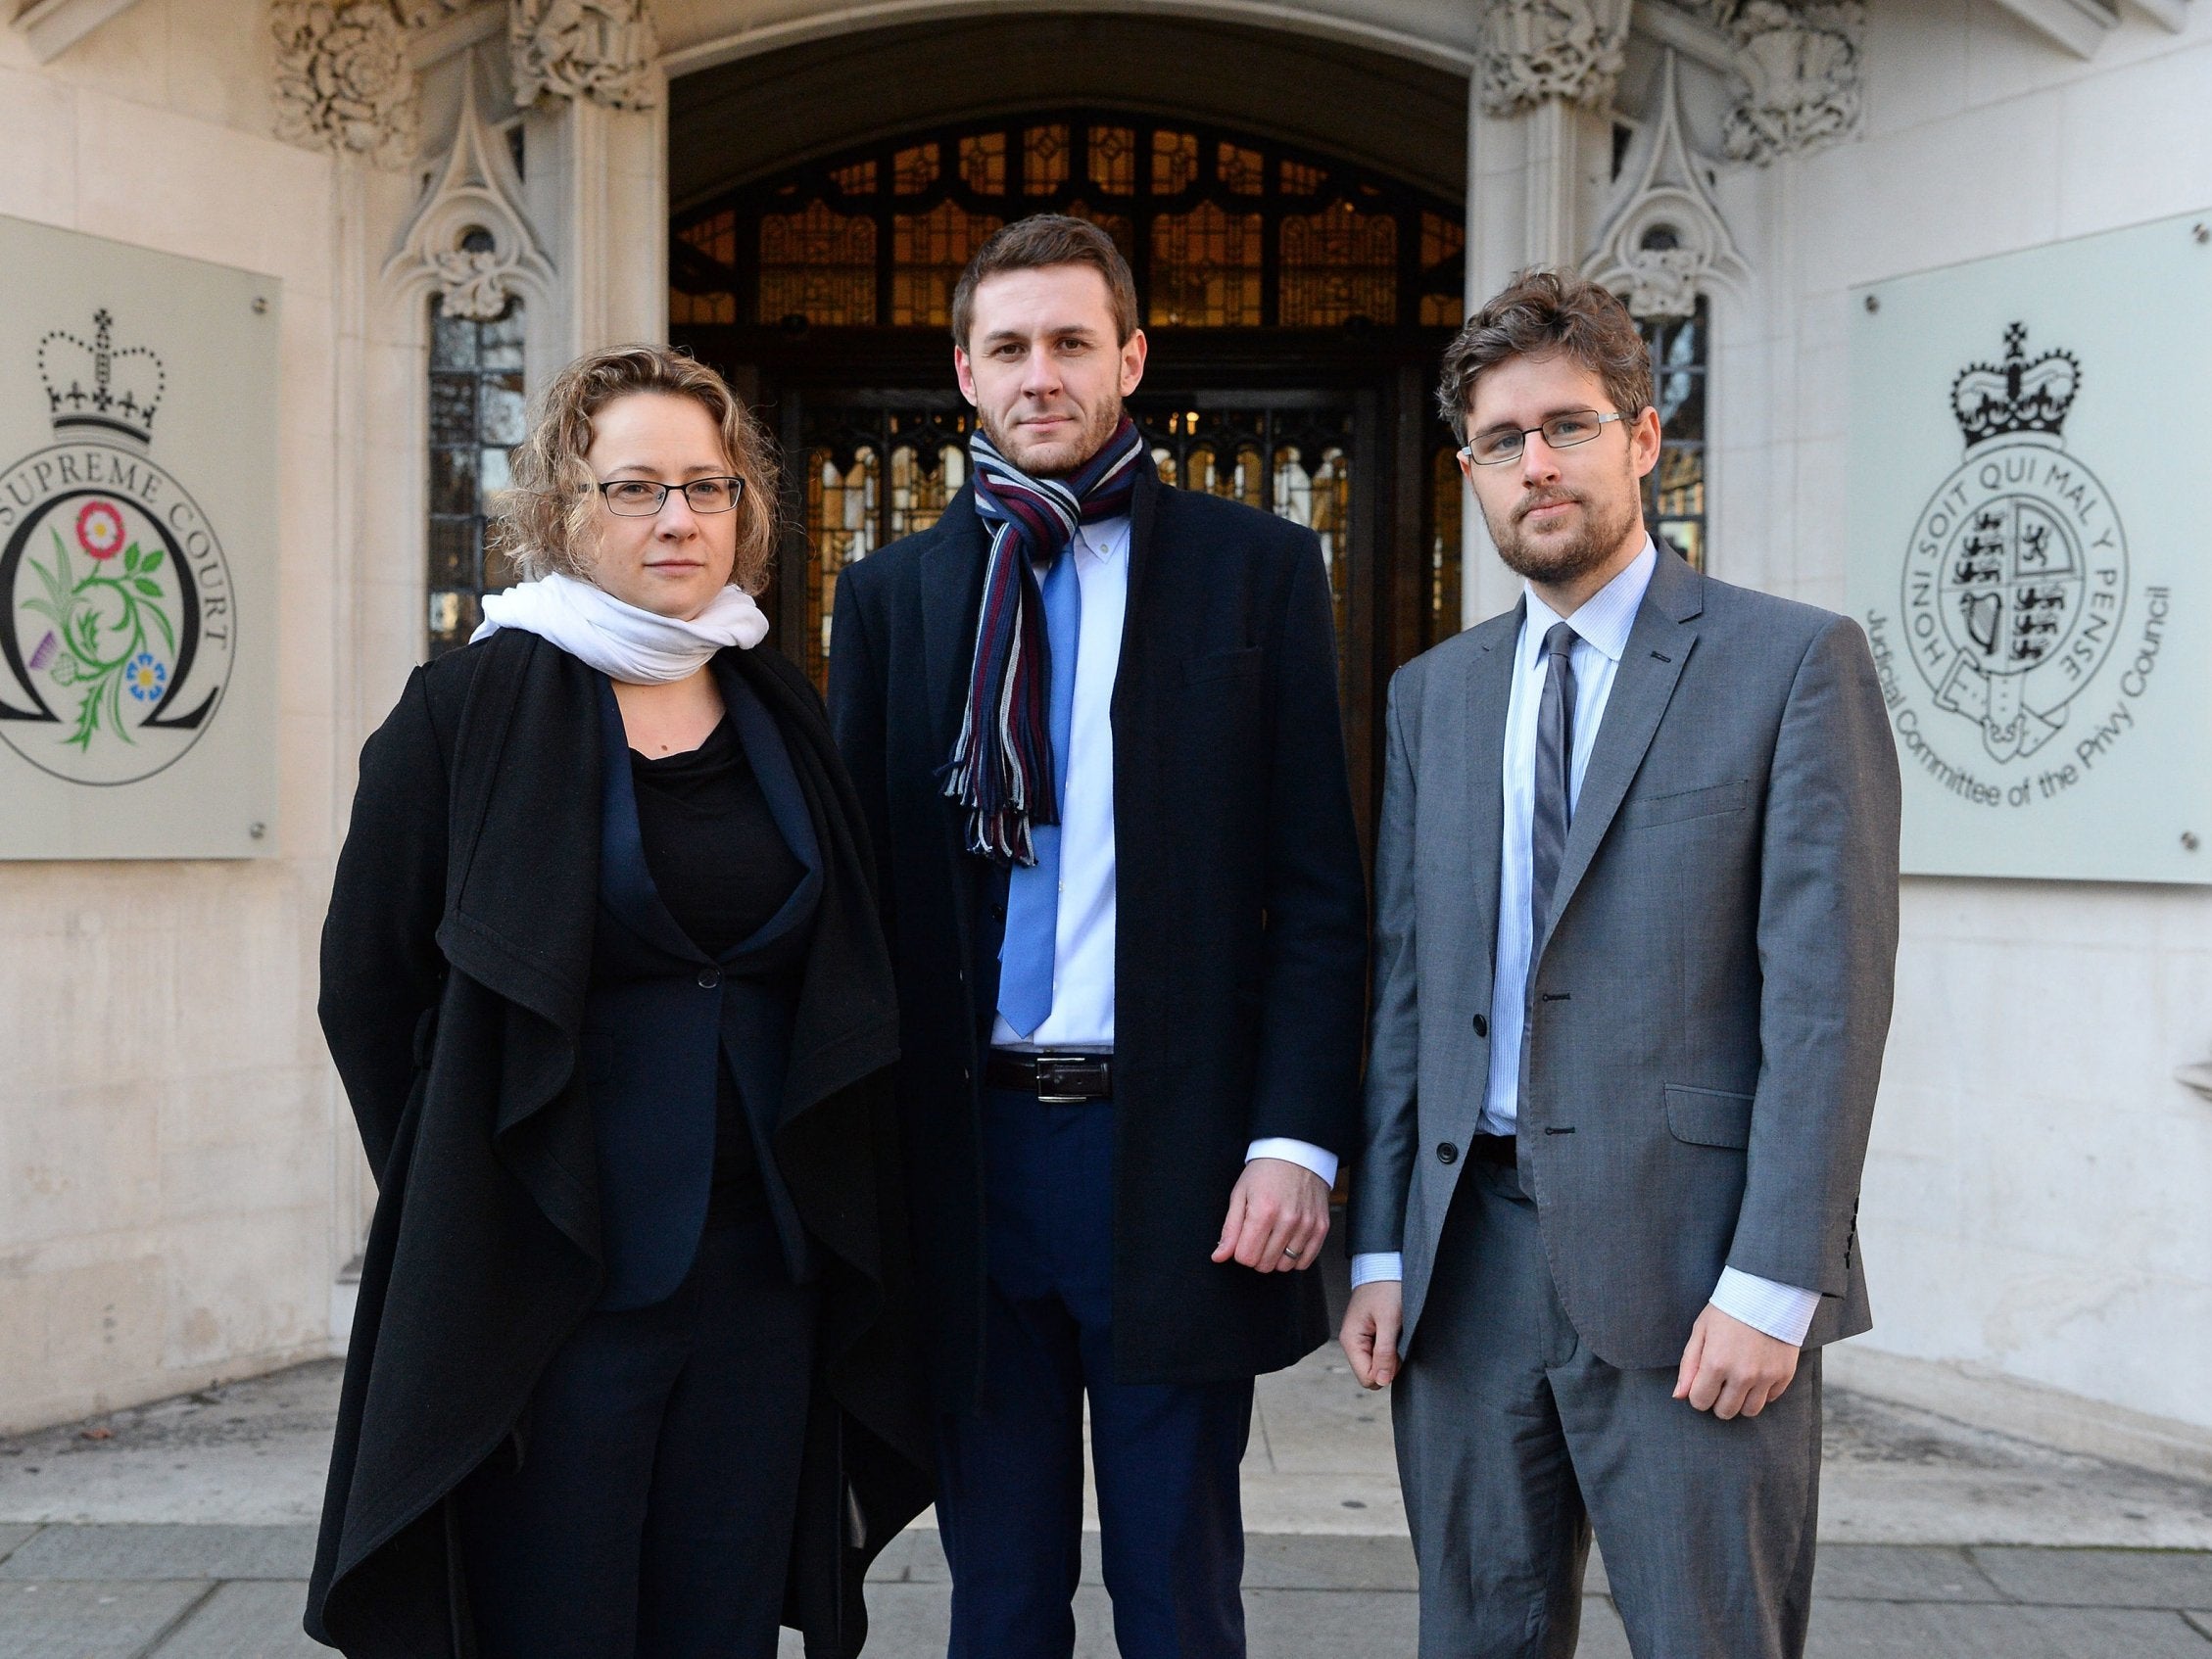 Jennifer Twite, Head of Strategic Litigation at Just for Kids Law, Christopher Stacey Co-director of Unlock, and Alex Temple, of Just for Kids Law, outside the Supreme Court in London on 30 January